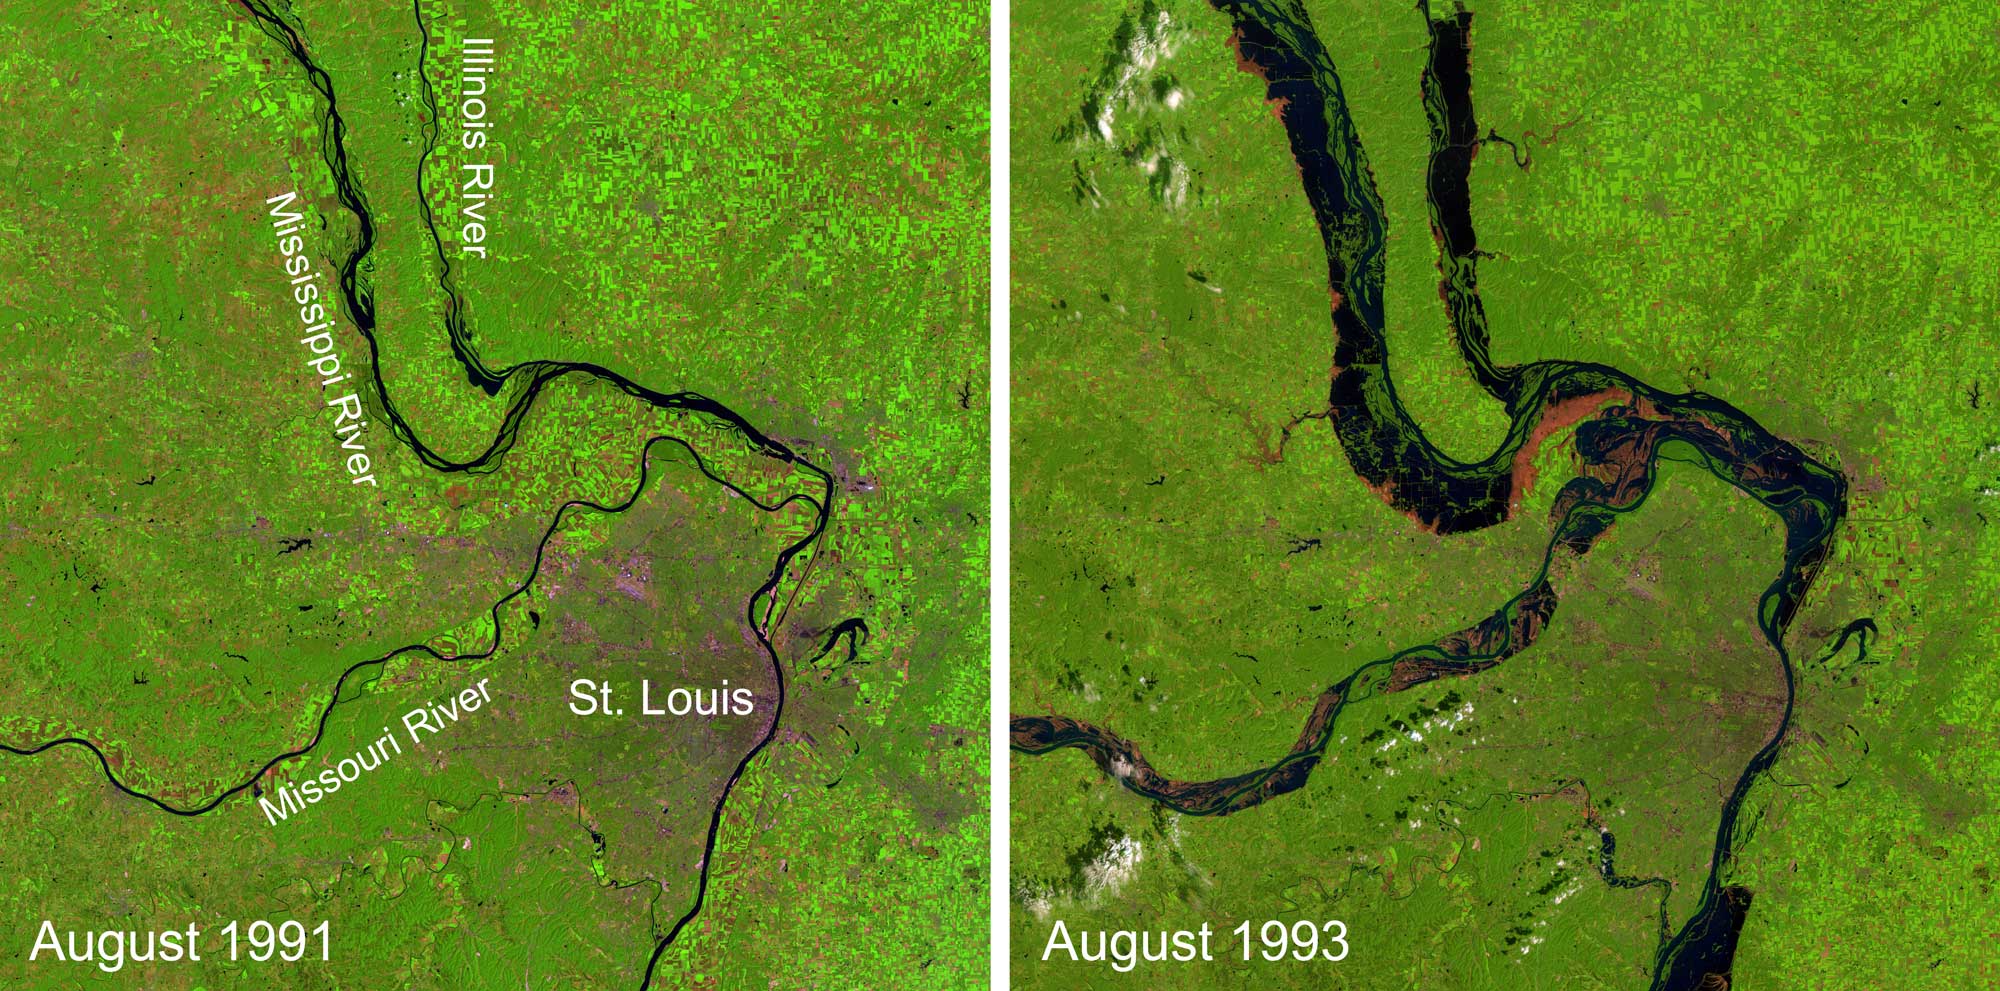 Two satellite map images that show the confluence of the Missouri and Mississippi rivers in 1991 and 1993 when flooding occurred.